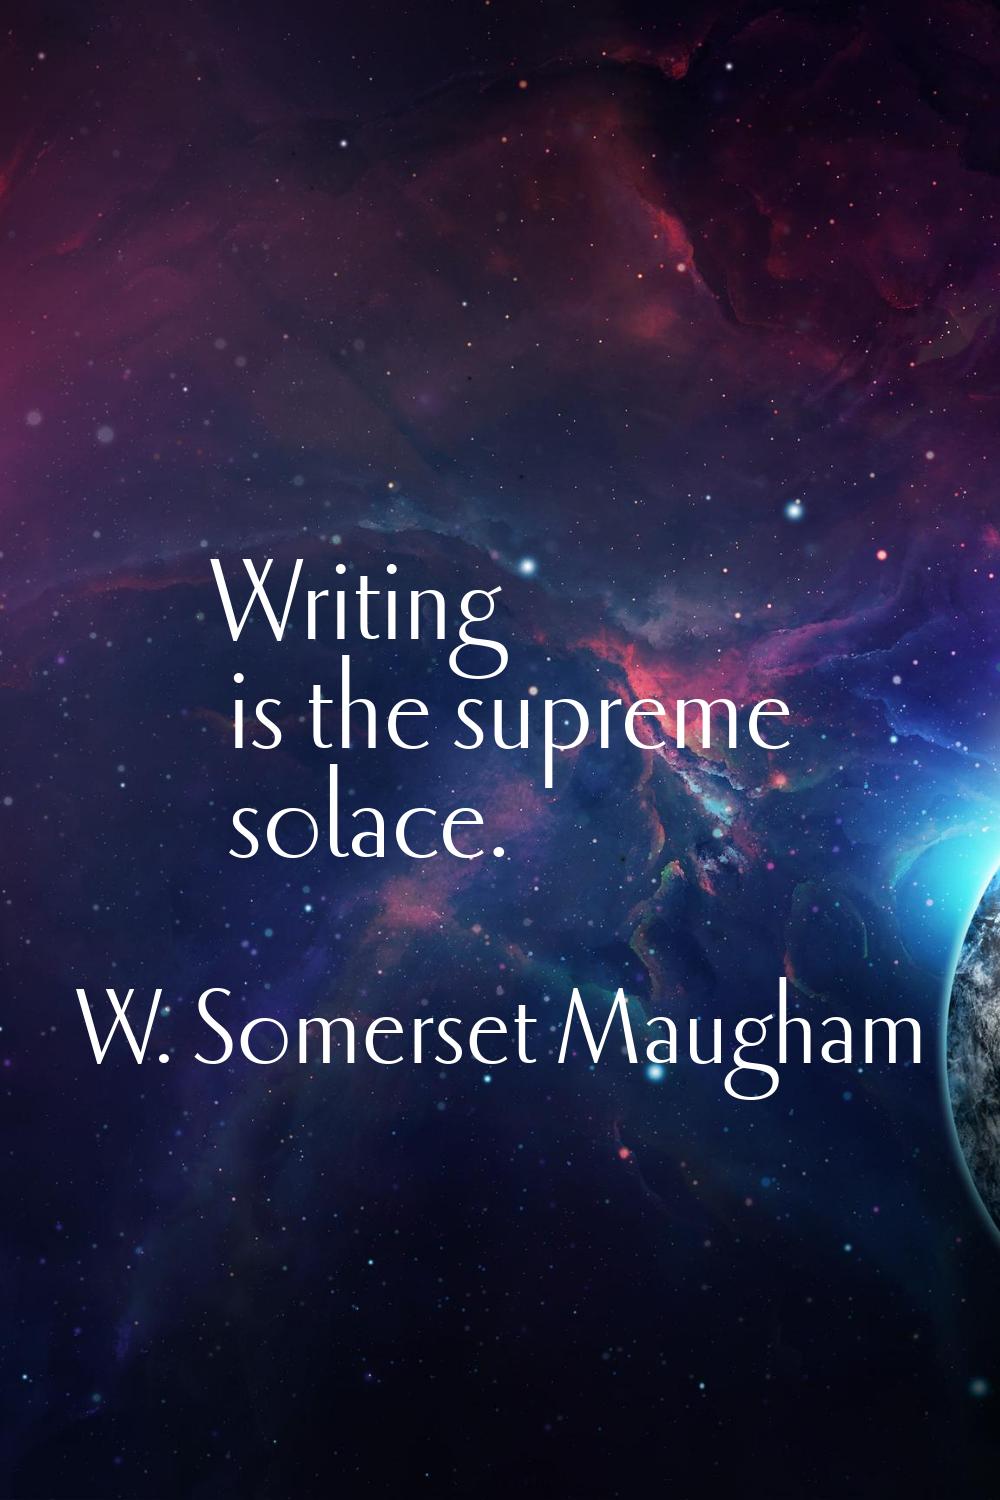 Writing is the supreme solace.